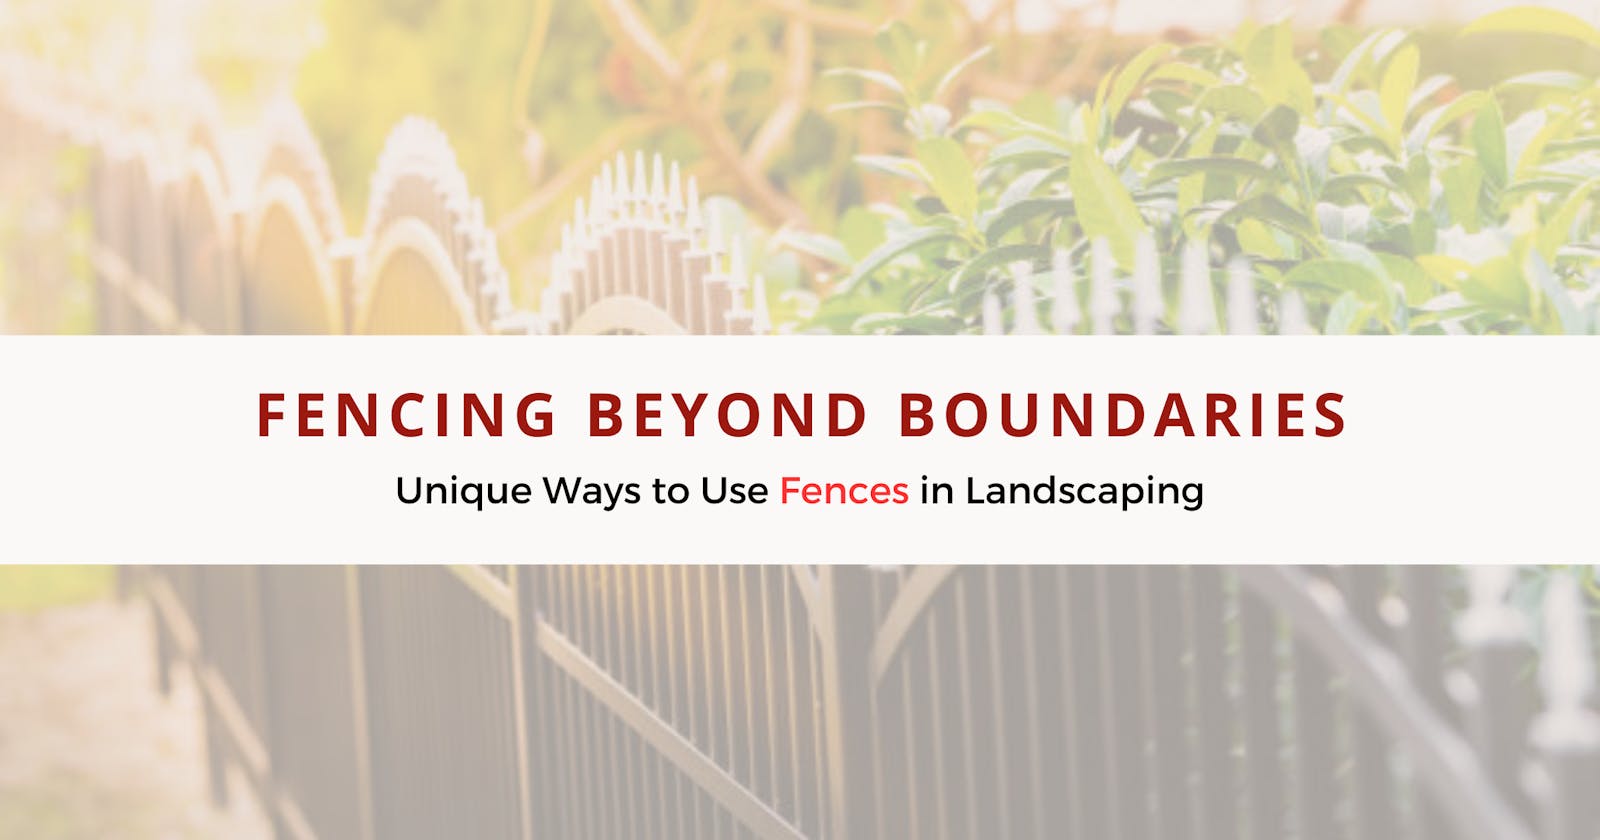 Fencing Beyond Boundaries: Unique Ways to Use Fences in Landscaping